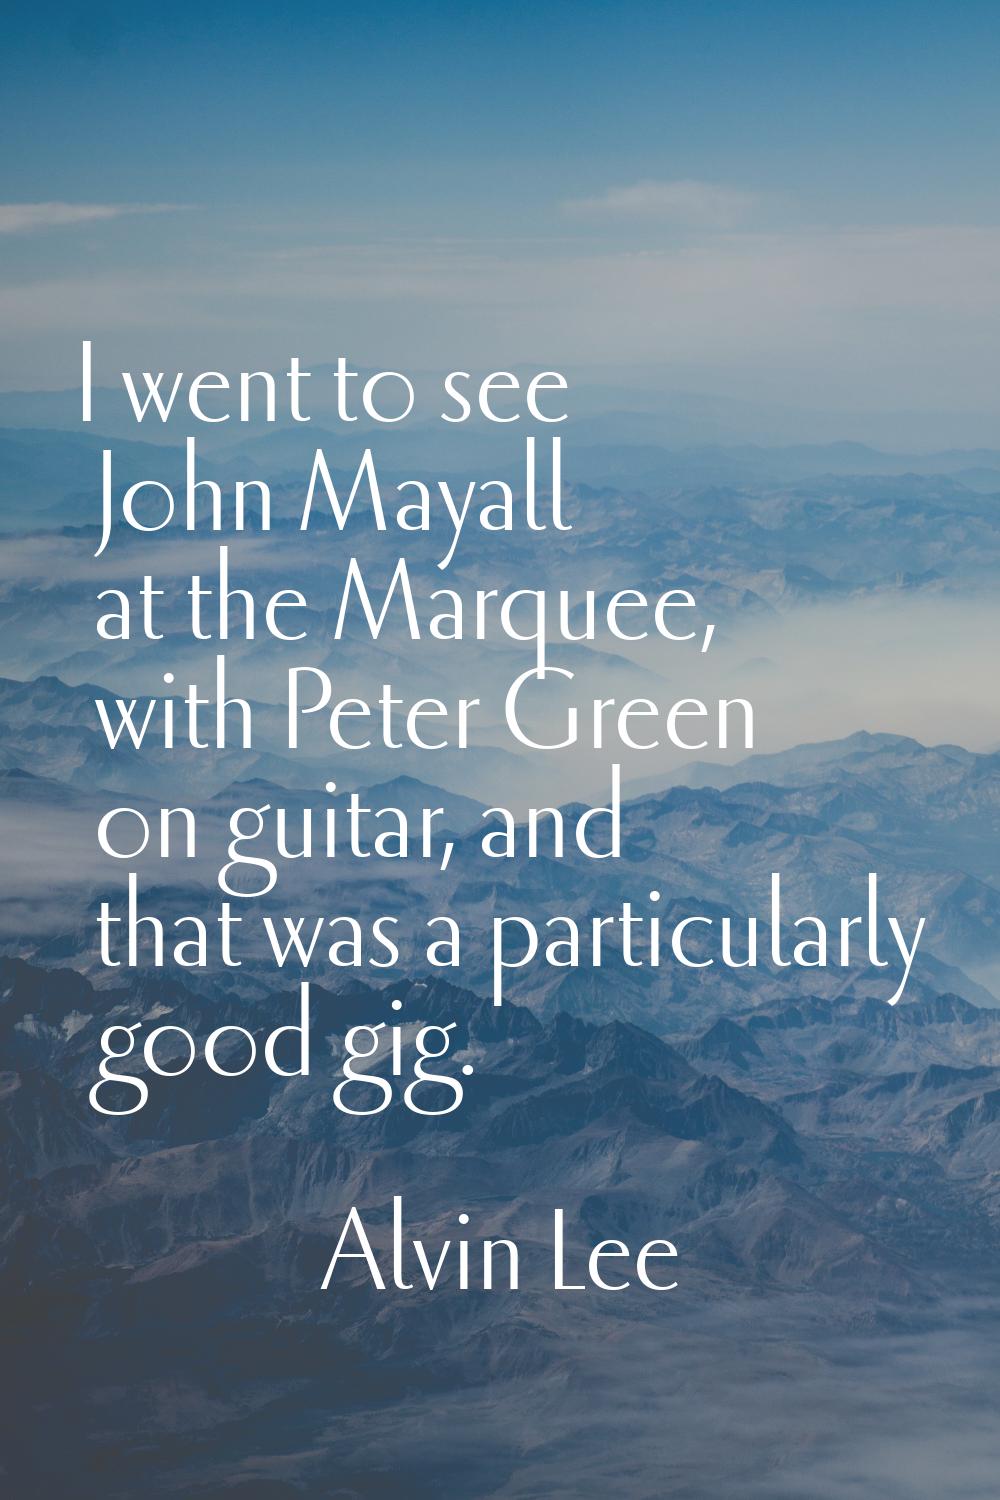 I went to see John Mayall at the Marquee, with Peter Green on guitar, and that was a particularly g